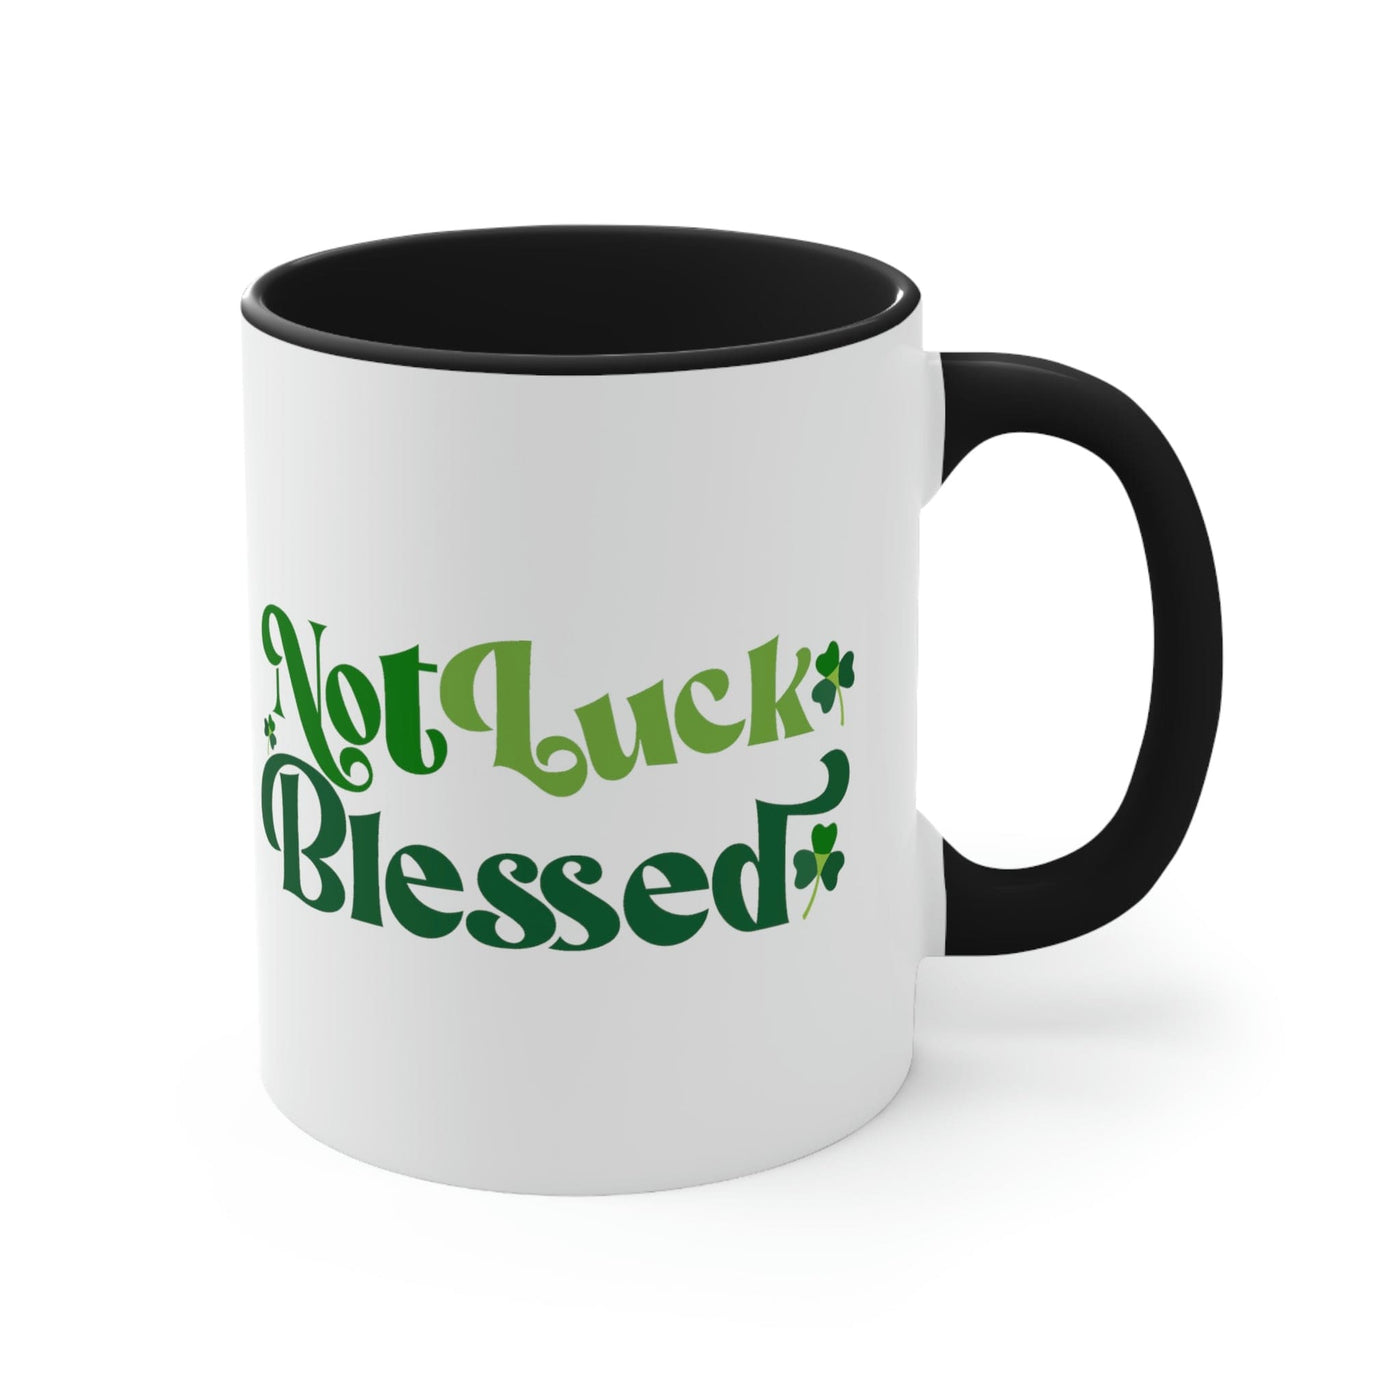 Two - tone Accent Ceramic Mug 11oz Not Luck Blessed Word Art Inspiration